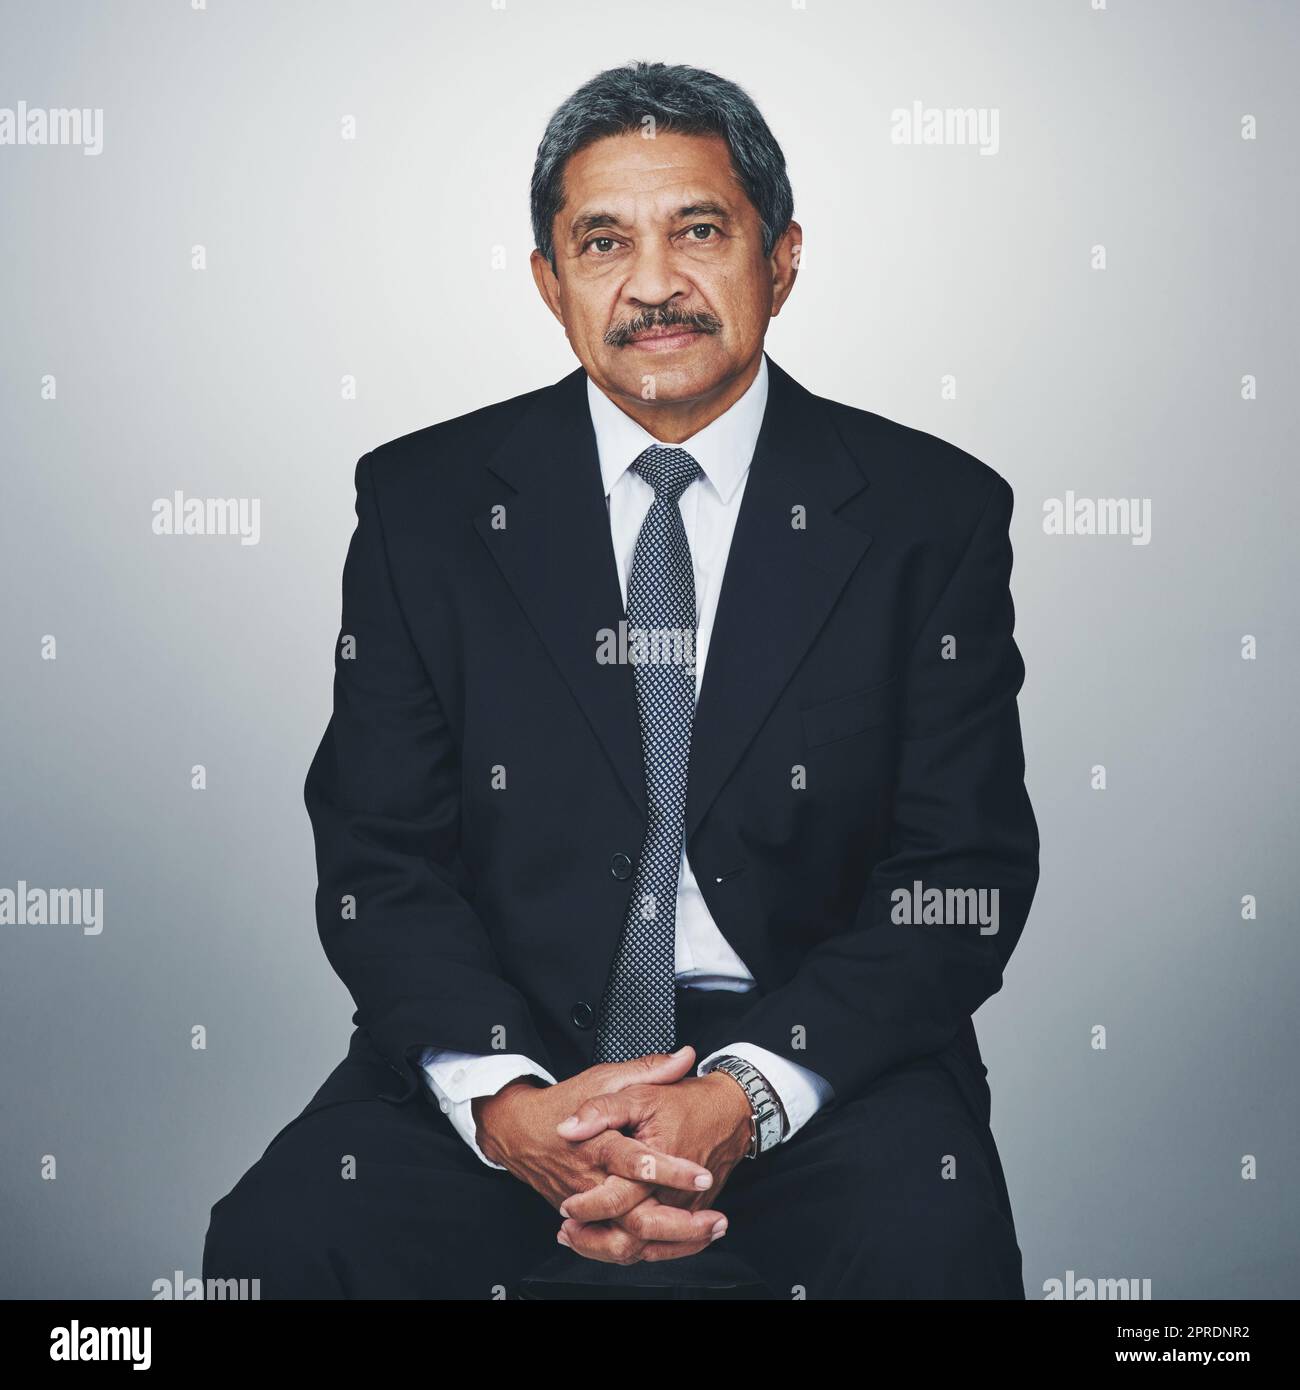 Hes experienced in his field. Studio portrait of a mature businessman posing against a grey background. Stock Photo